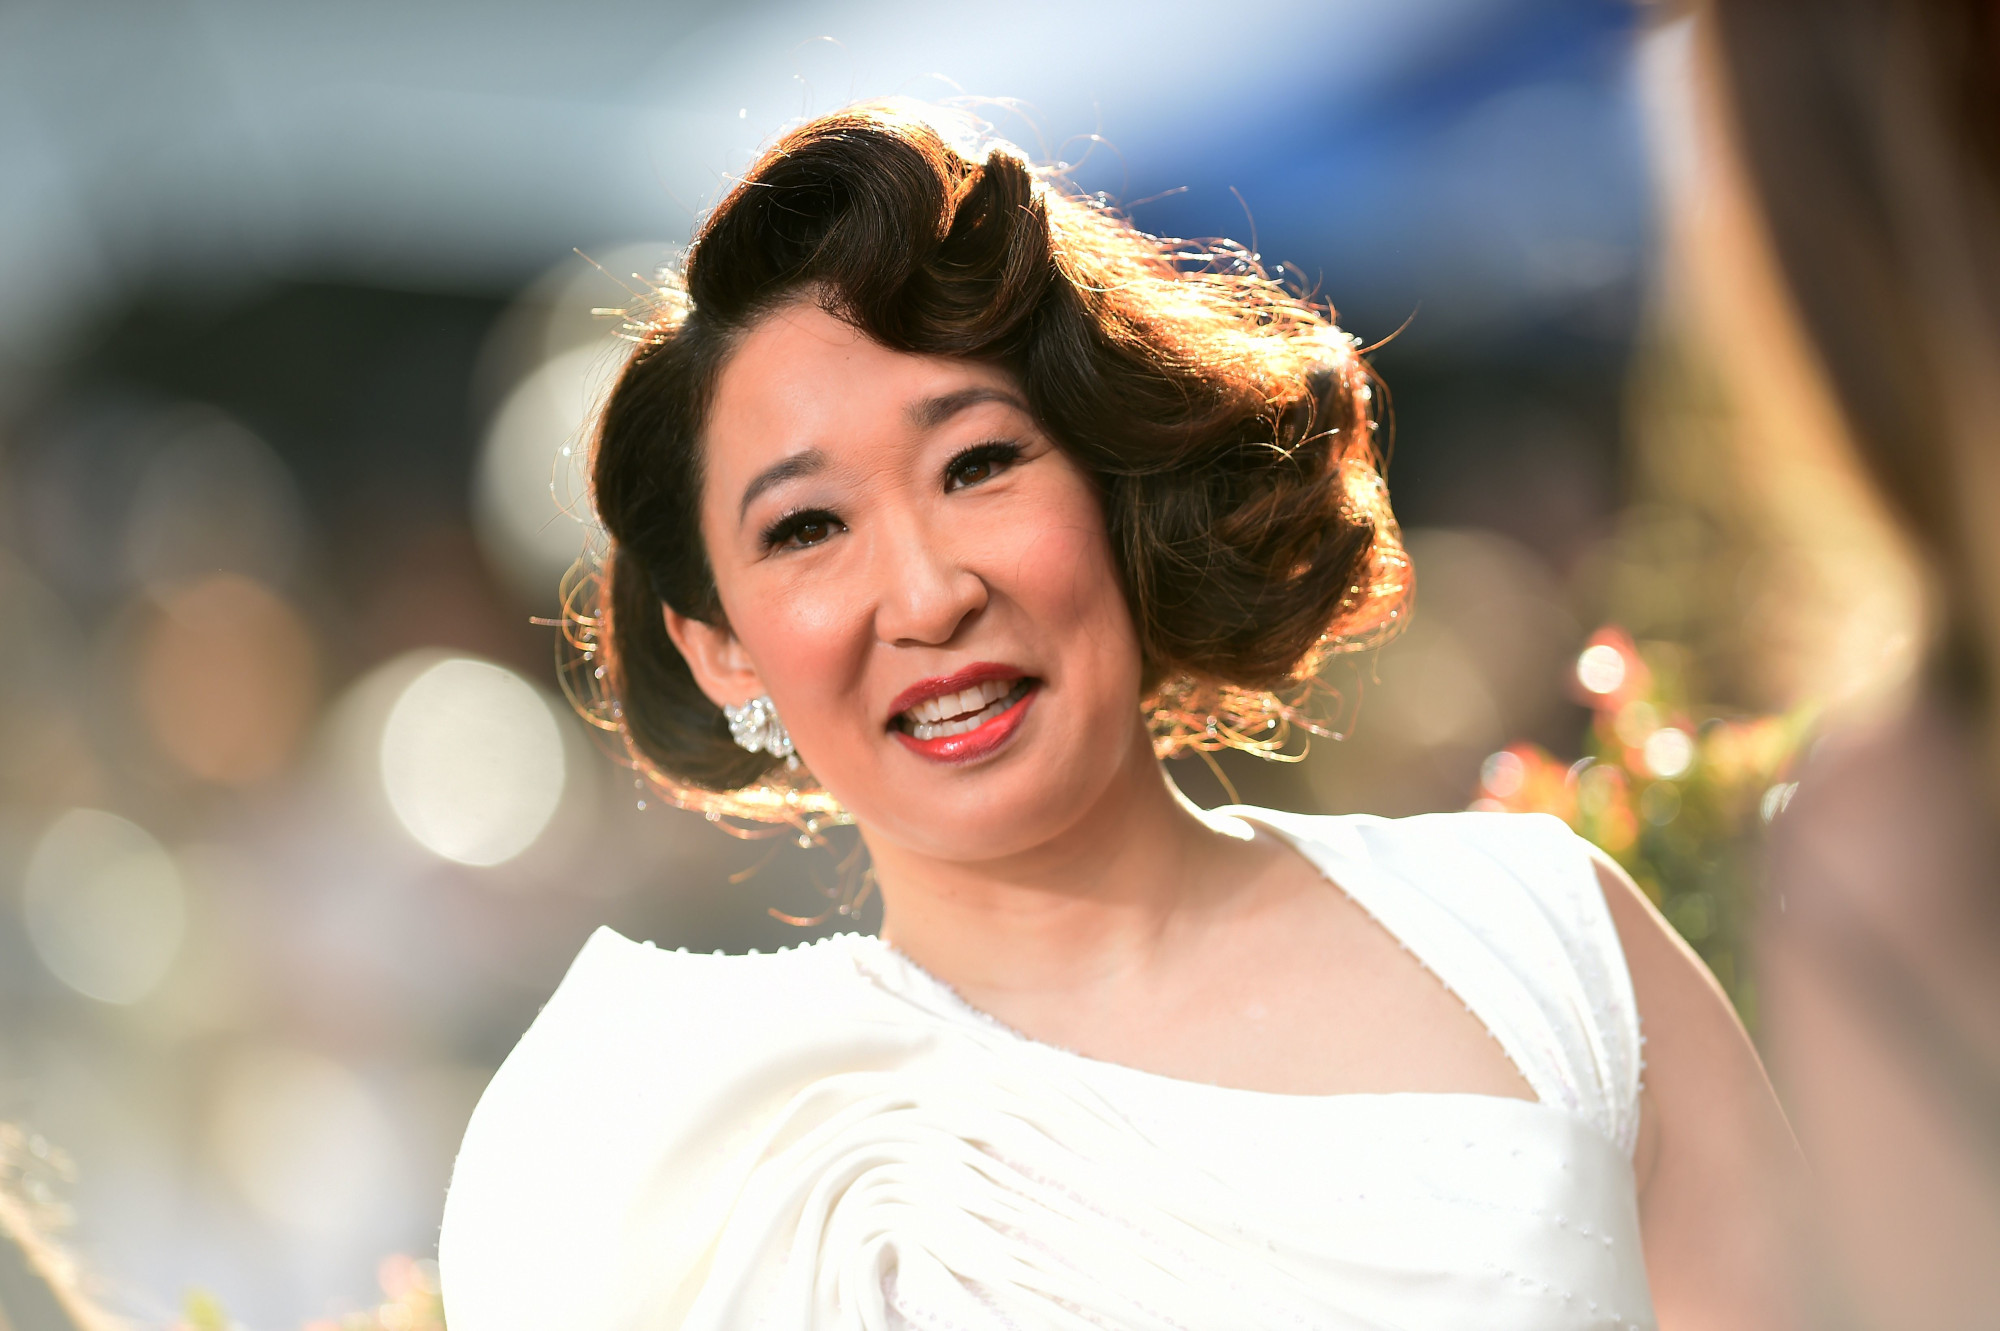 'Grey's Anatomy' star Sandra Oh wearing a white dress. Her hair is curled and she's smiling. The background behind her is blurred.